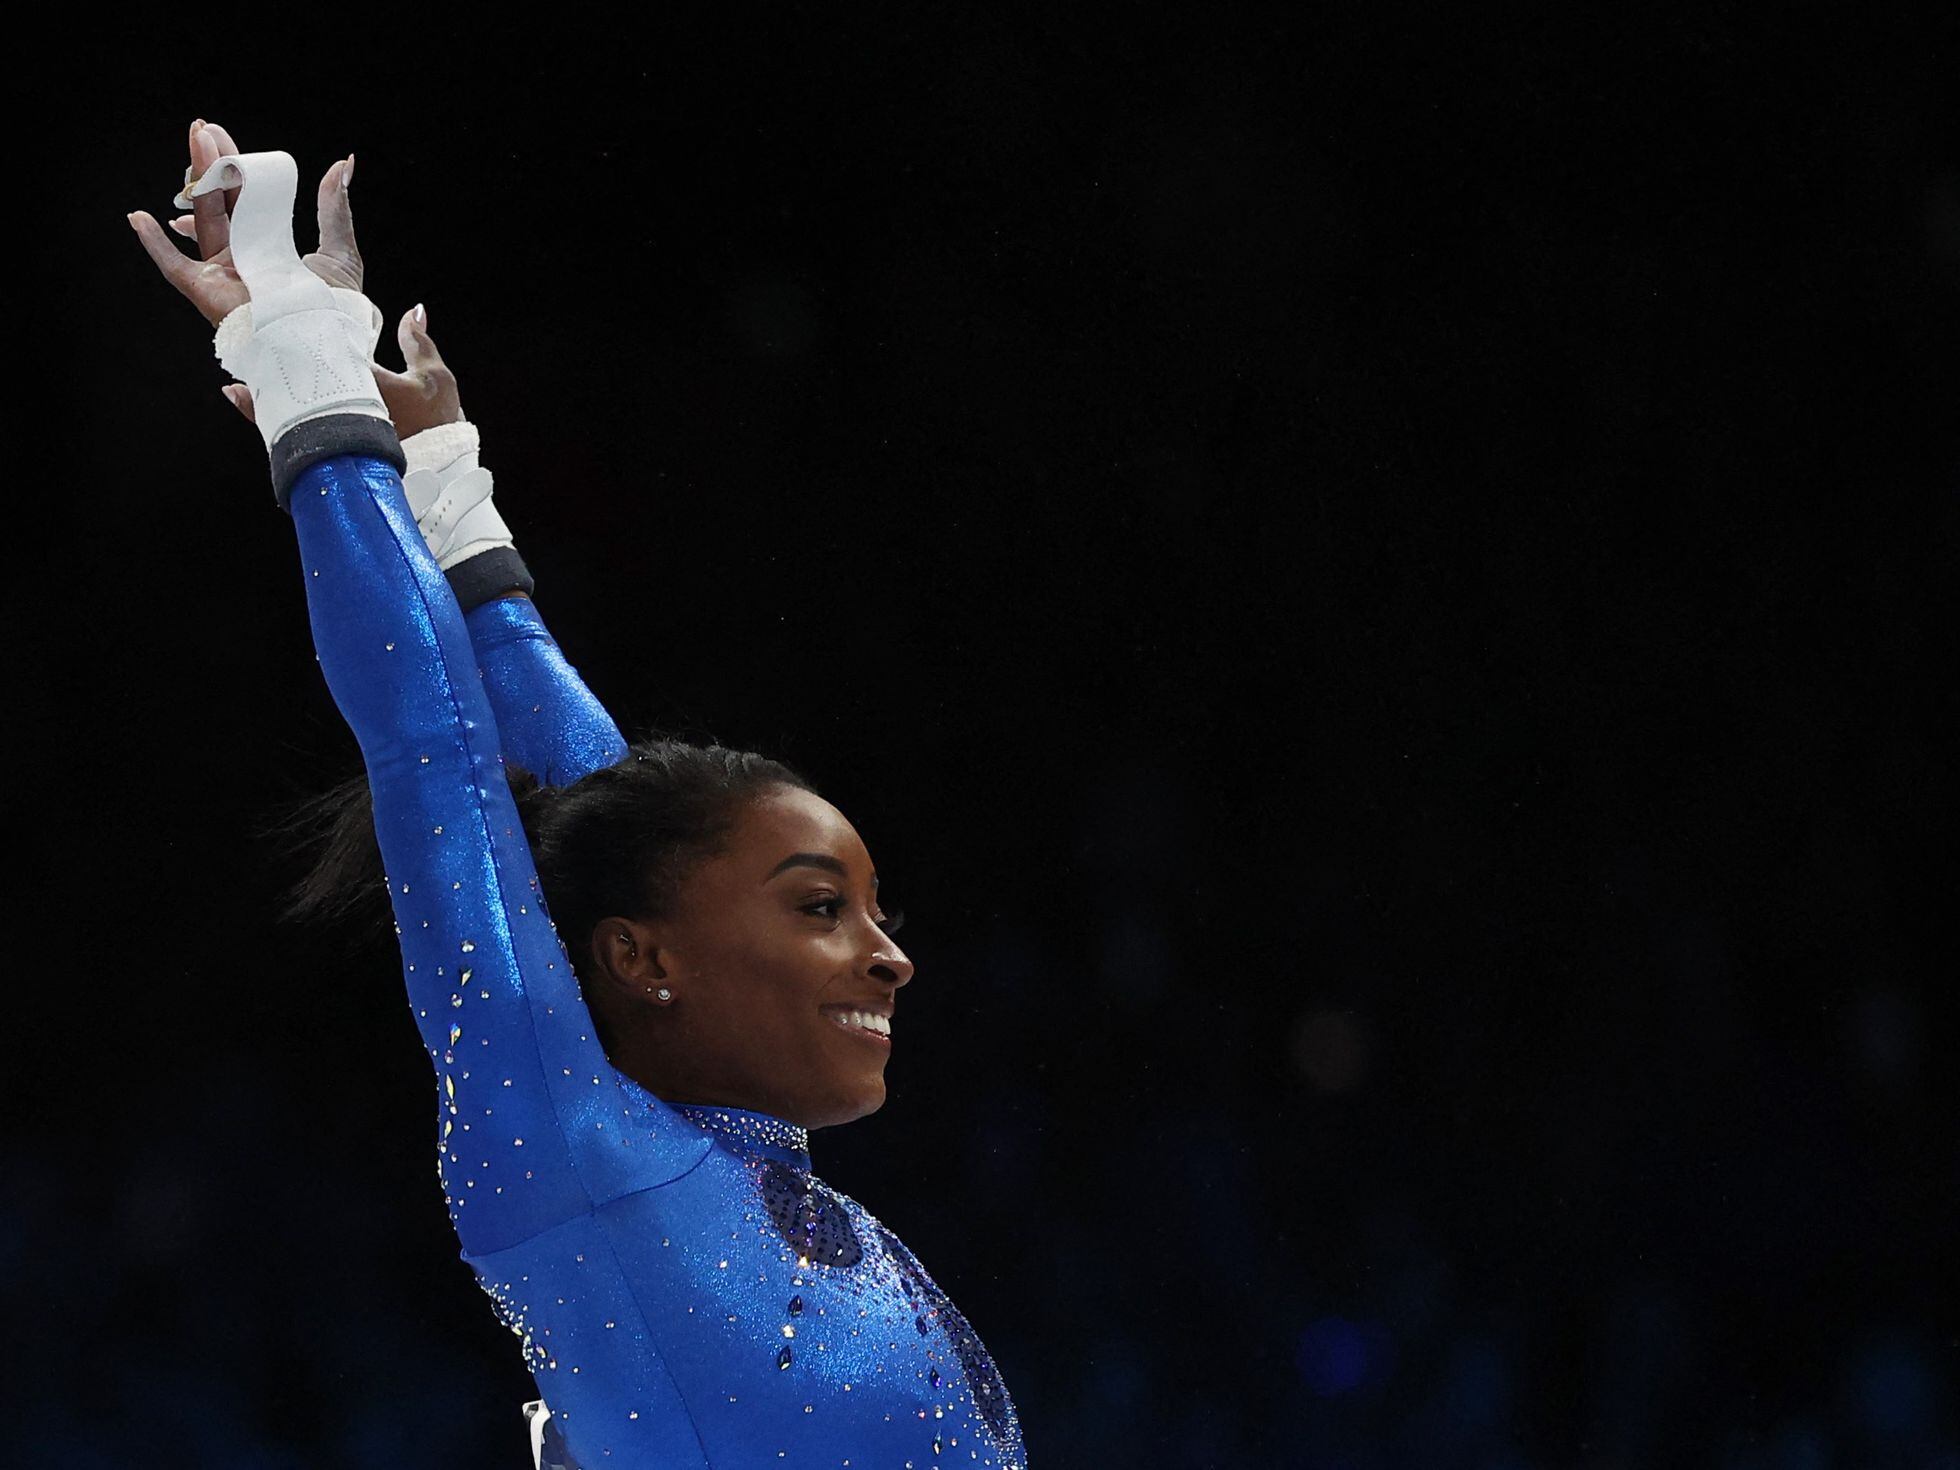 The Hate on Simone Biles is Everything that is Wrong with Society